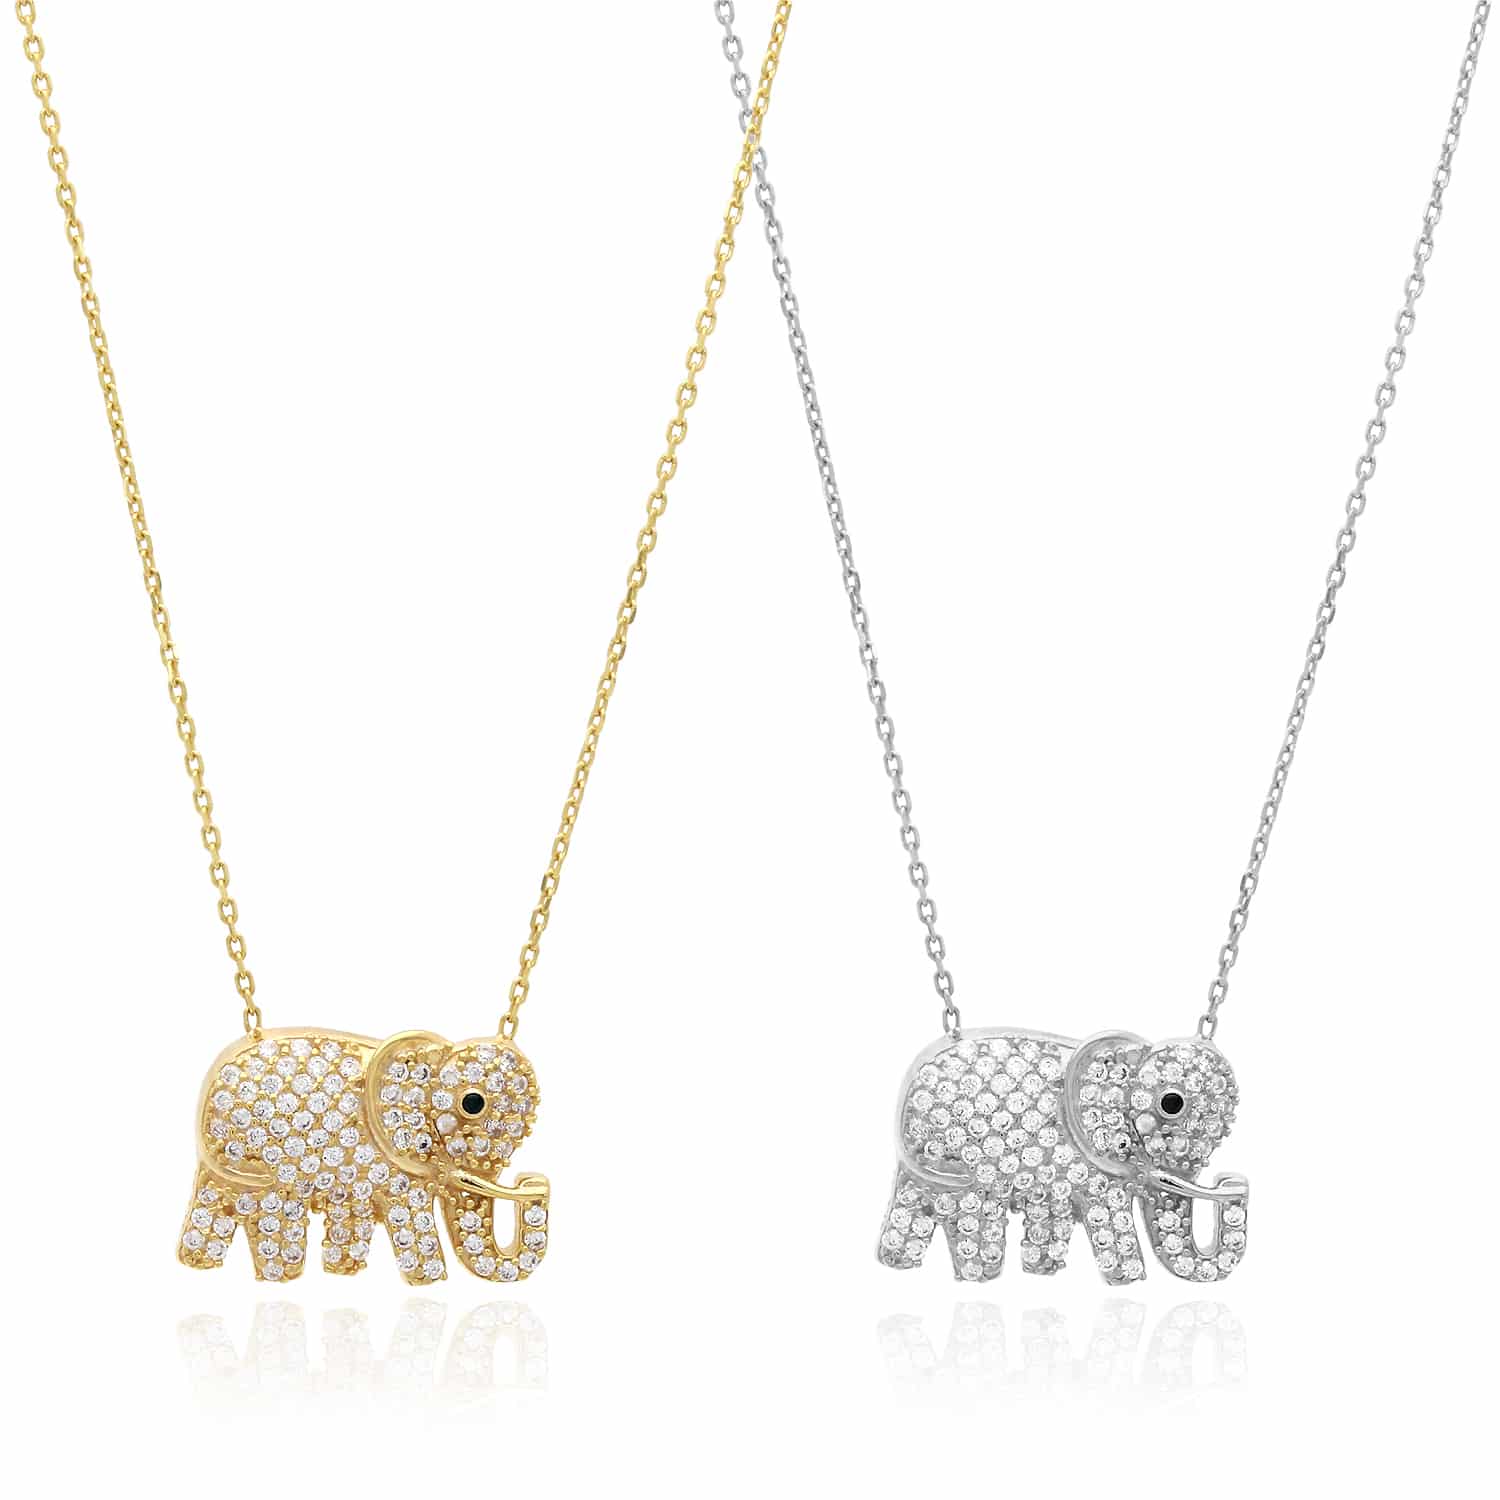 18K Gold Over Silver Simulated Diamond Elephant Pendant Necklace 16"-17.5" Adjus - White Gold Plated